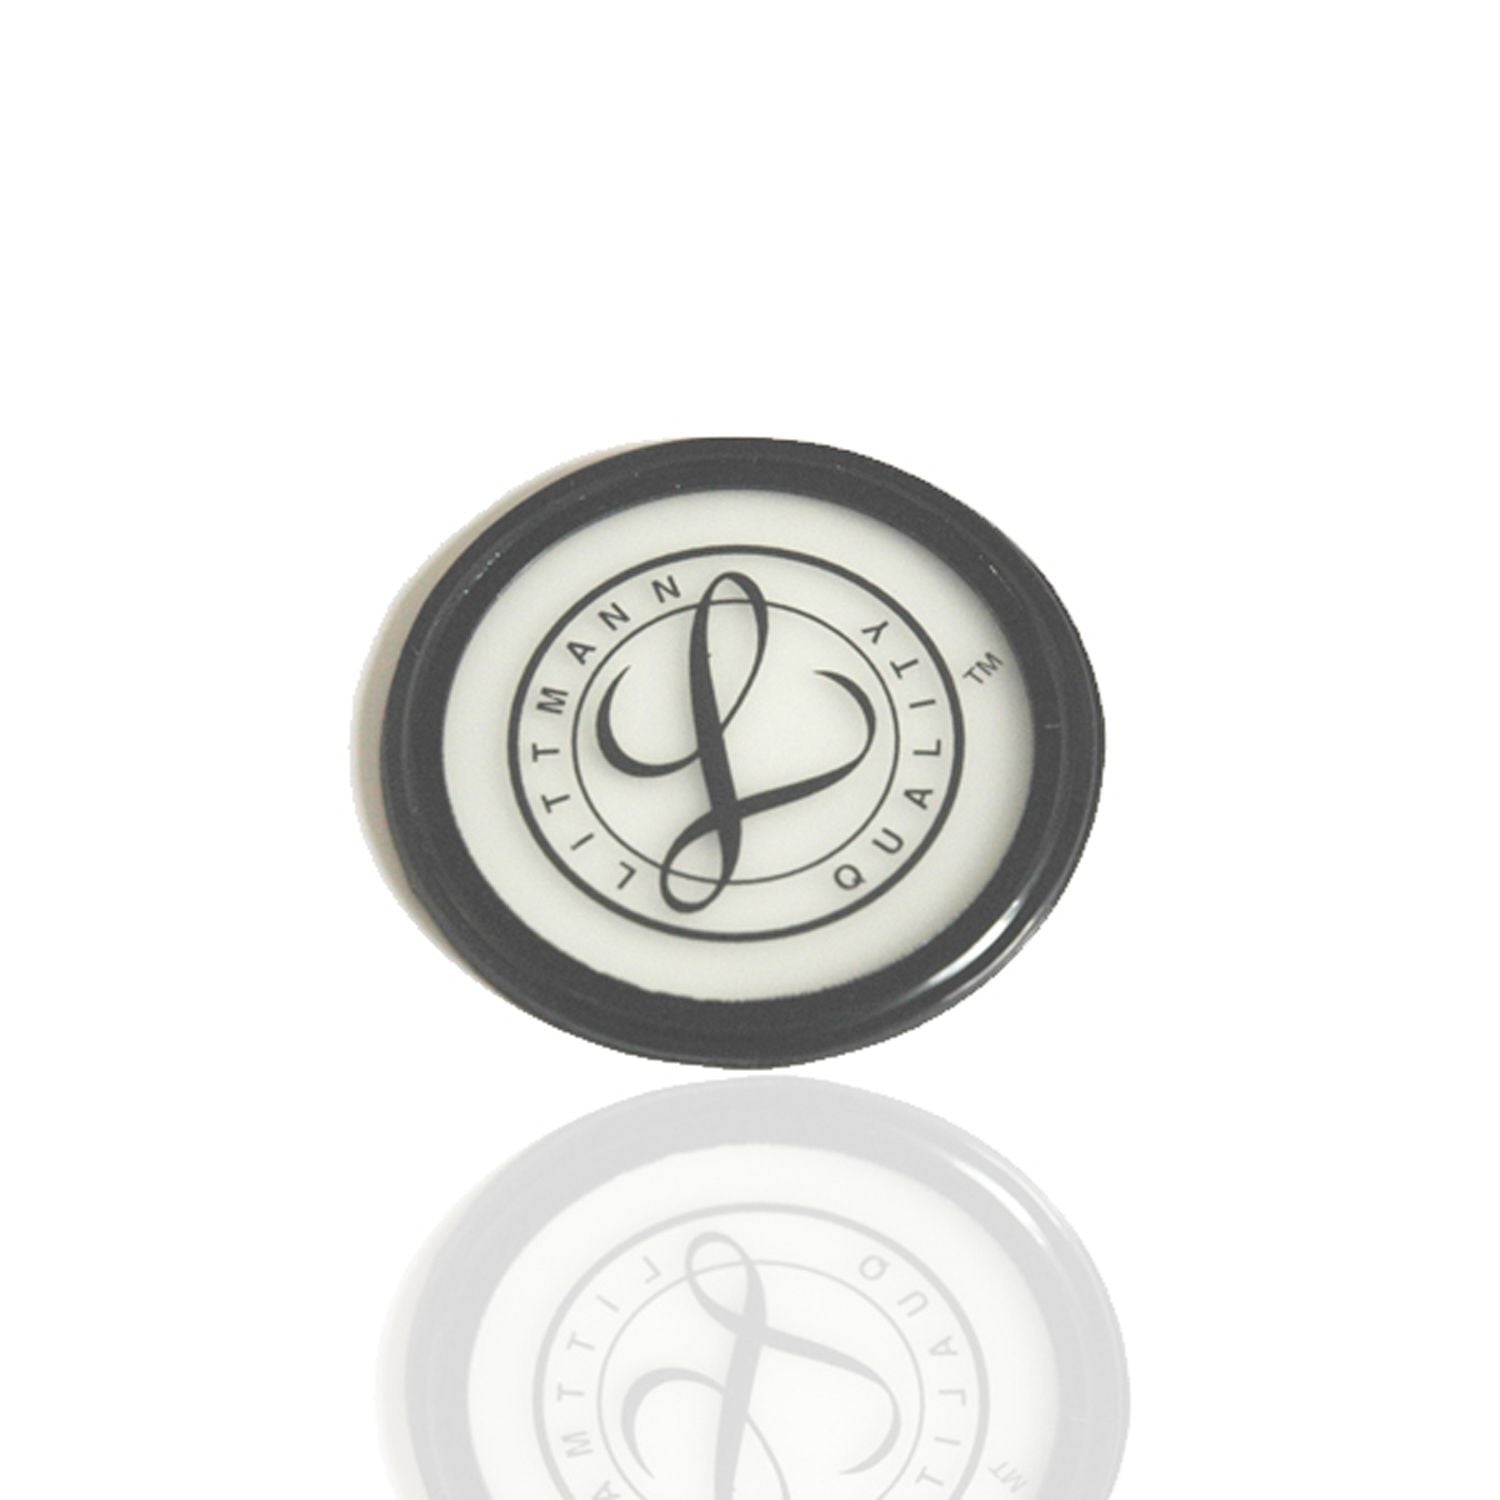 Tuneable Diaphragm & Rim Assembly for Master Cardiology | Black (Single Piece)